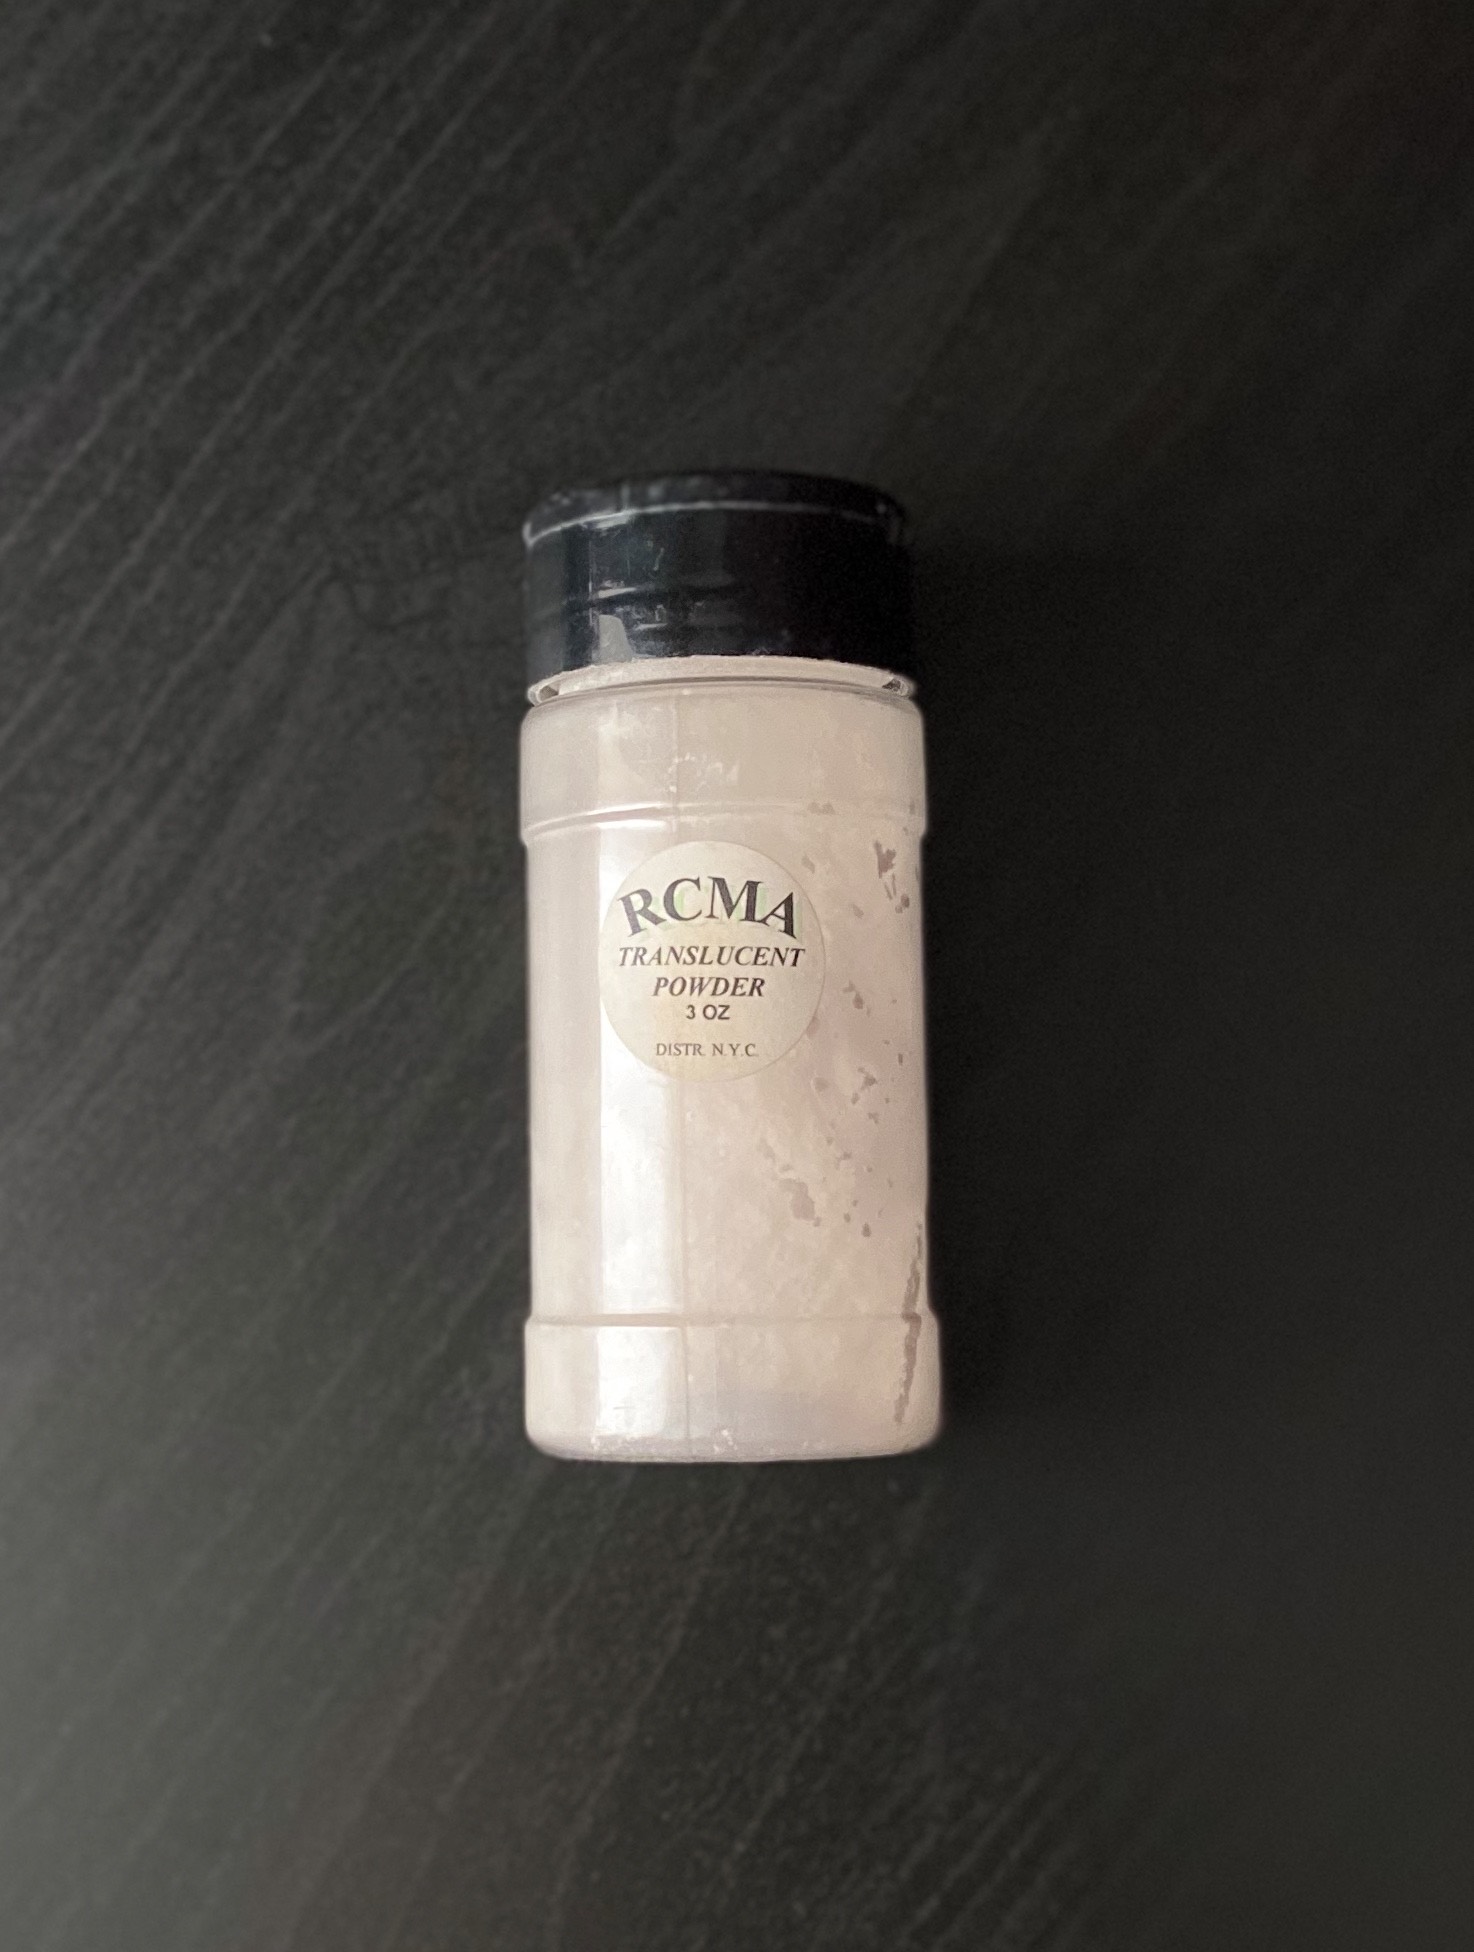 RCMA Make-Up - Hi everyone, we posted this a few months ago but I wanted to  repost it because I don't want people to be confused about our powders.  PLEASE NOTE that